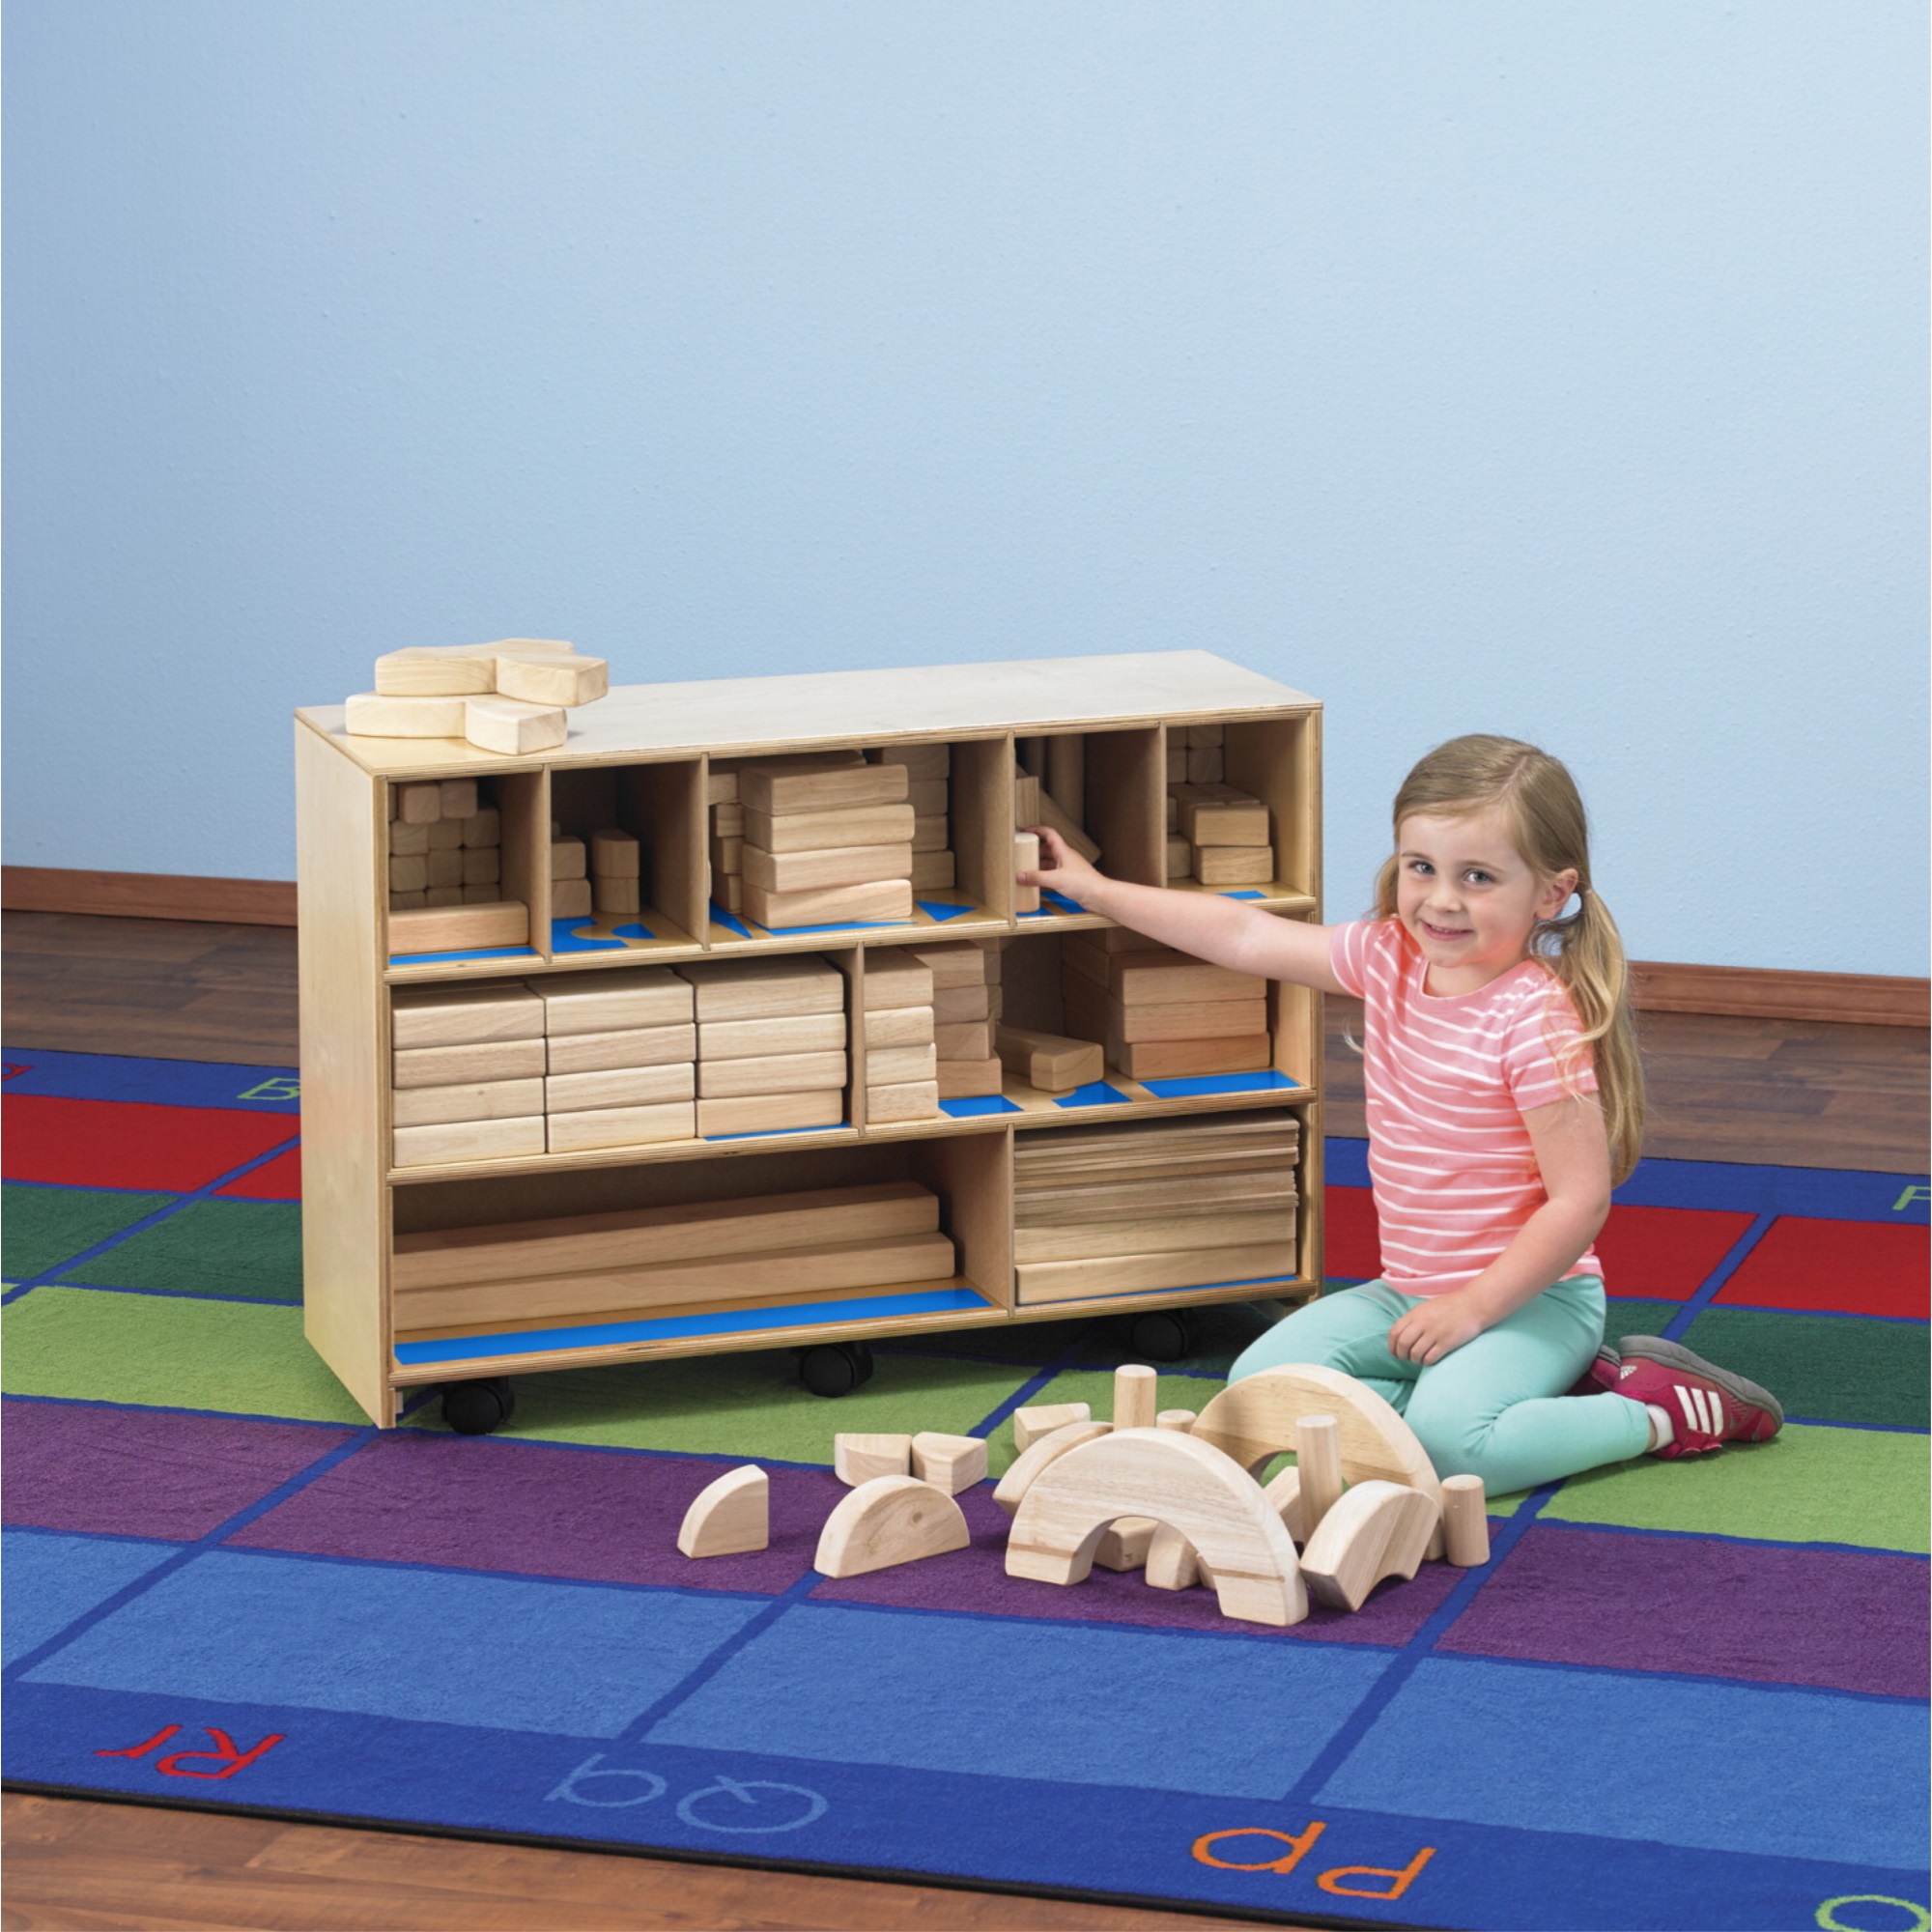 Childcraft Mobile Cabinet and Block Set, 36-1/2 x 13 x 24-13/16 Inches